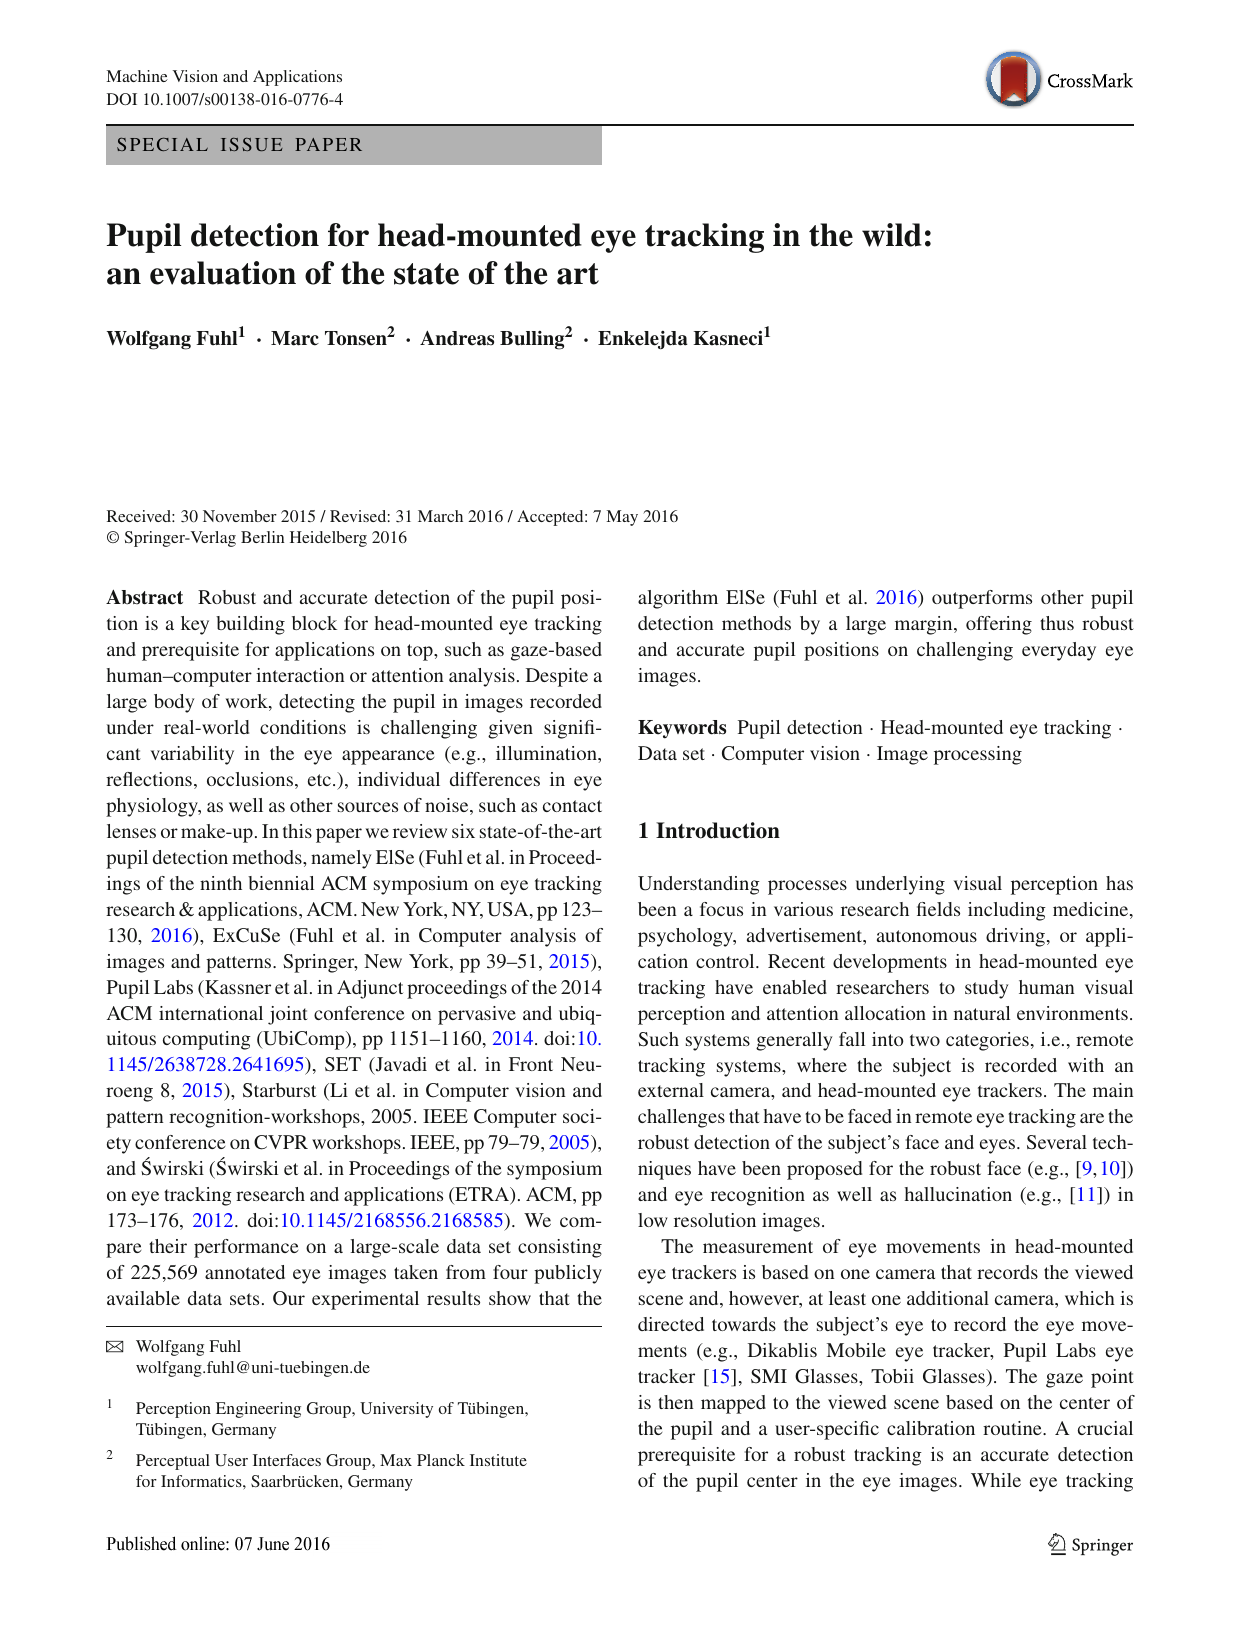 Pupil detection for head-mounted eye tracking in the wild: an evaluation of the state of the art